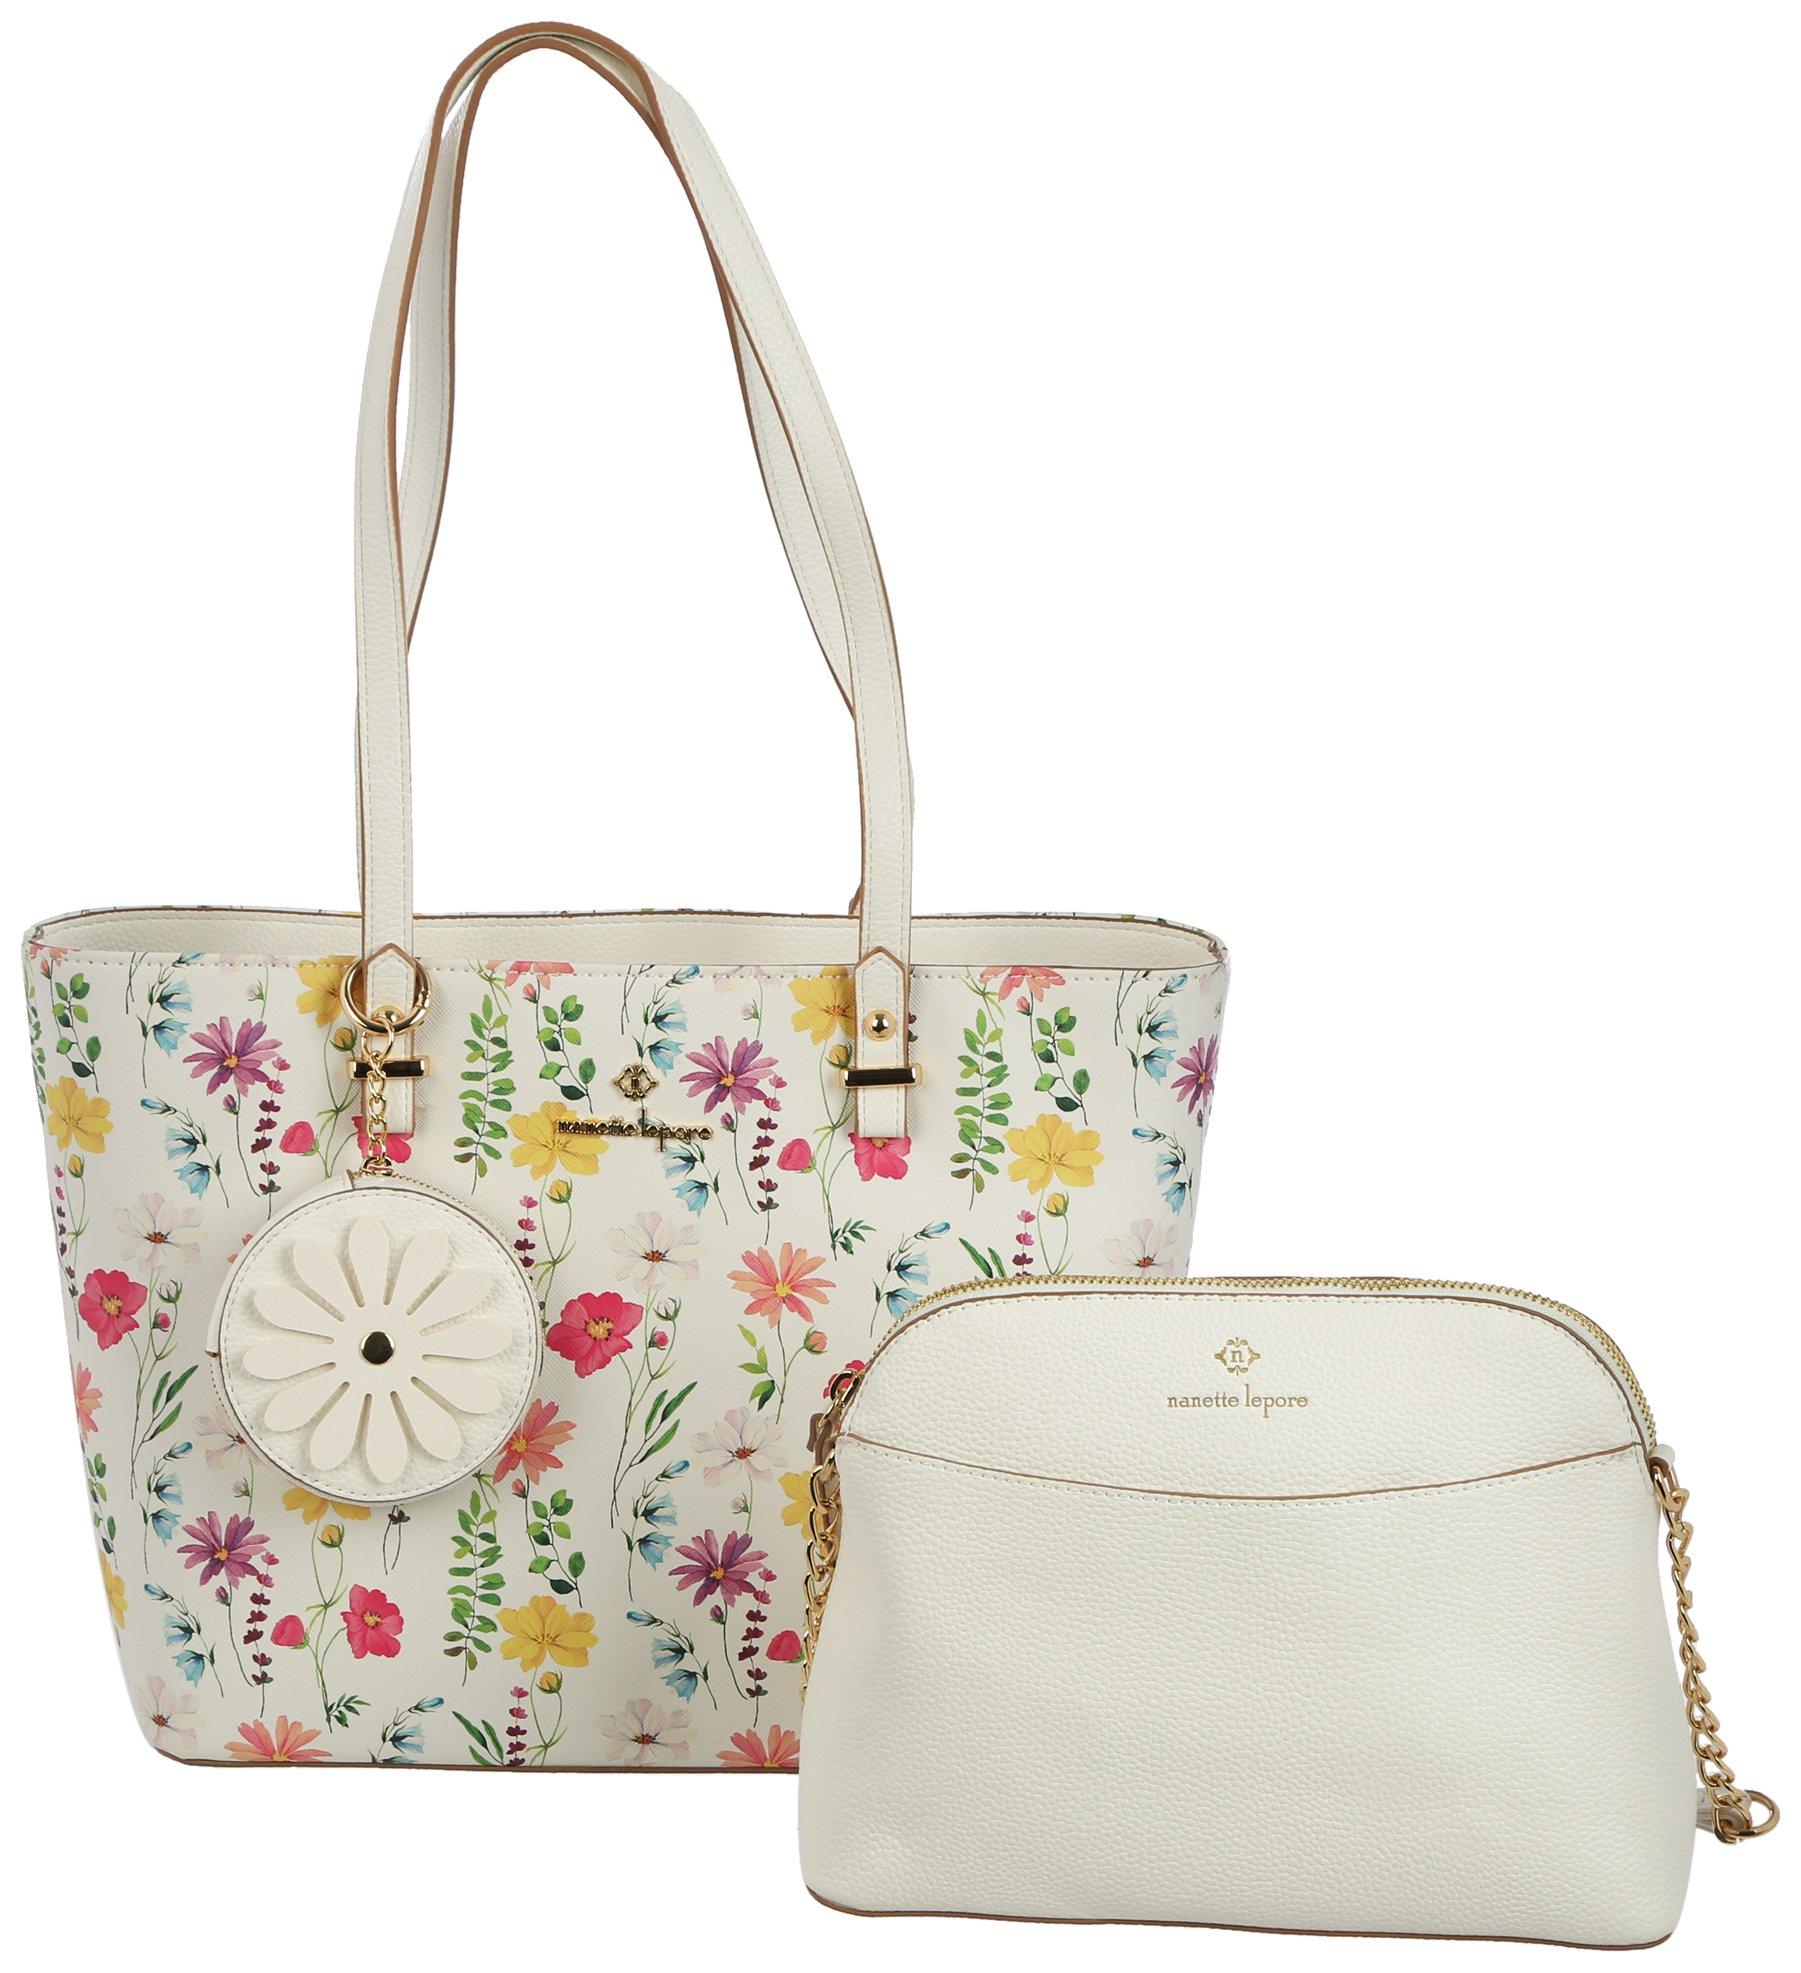 2 Pc. Floral Tote and Crossbody Set